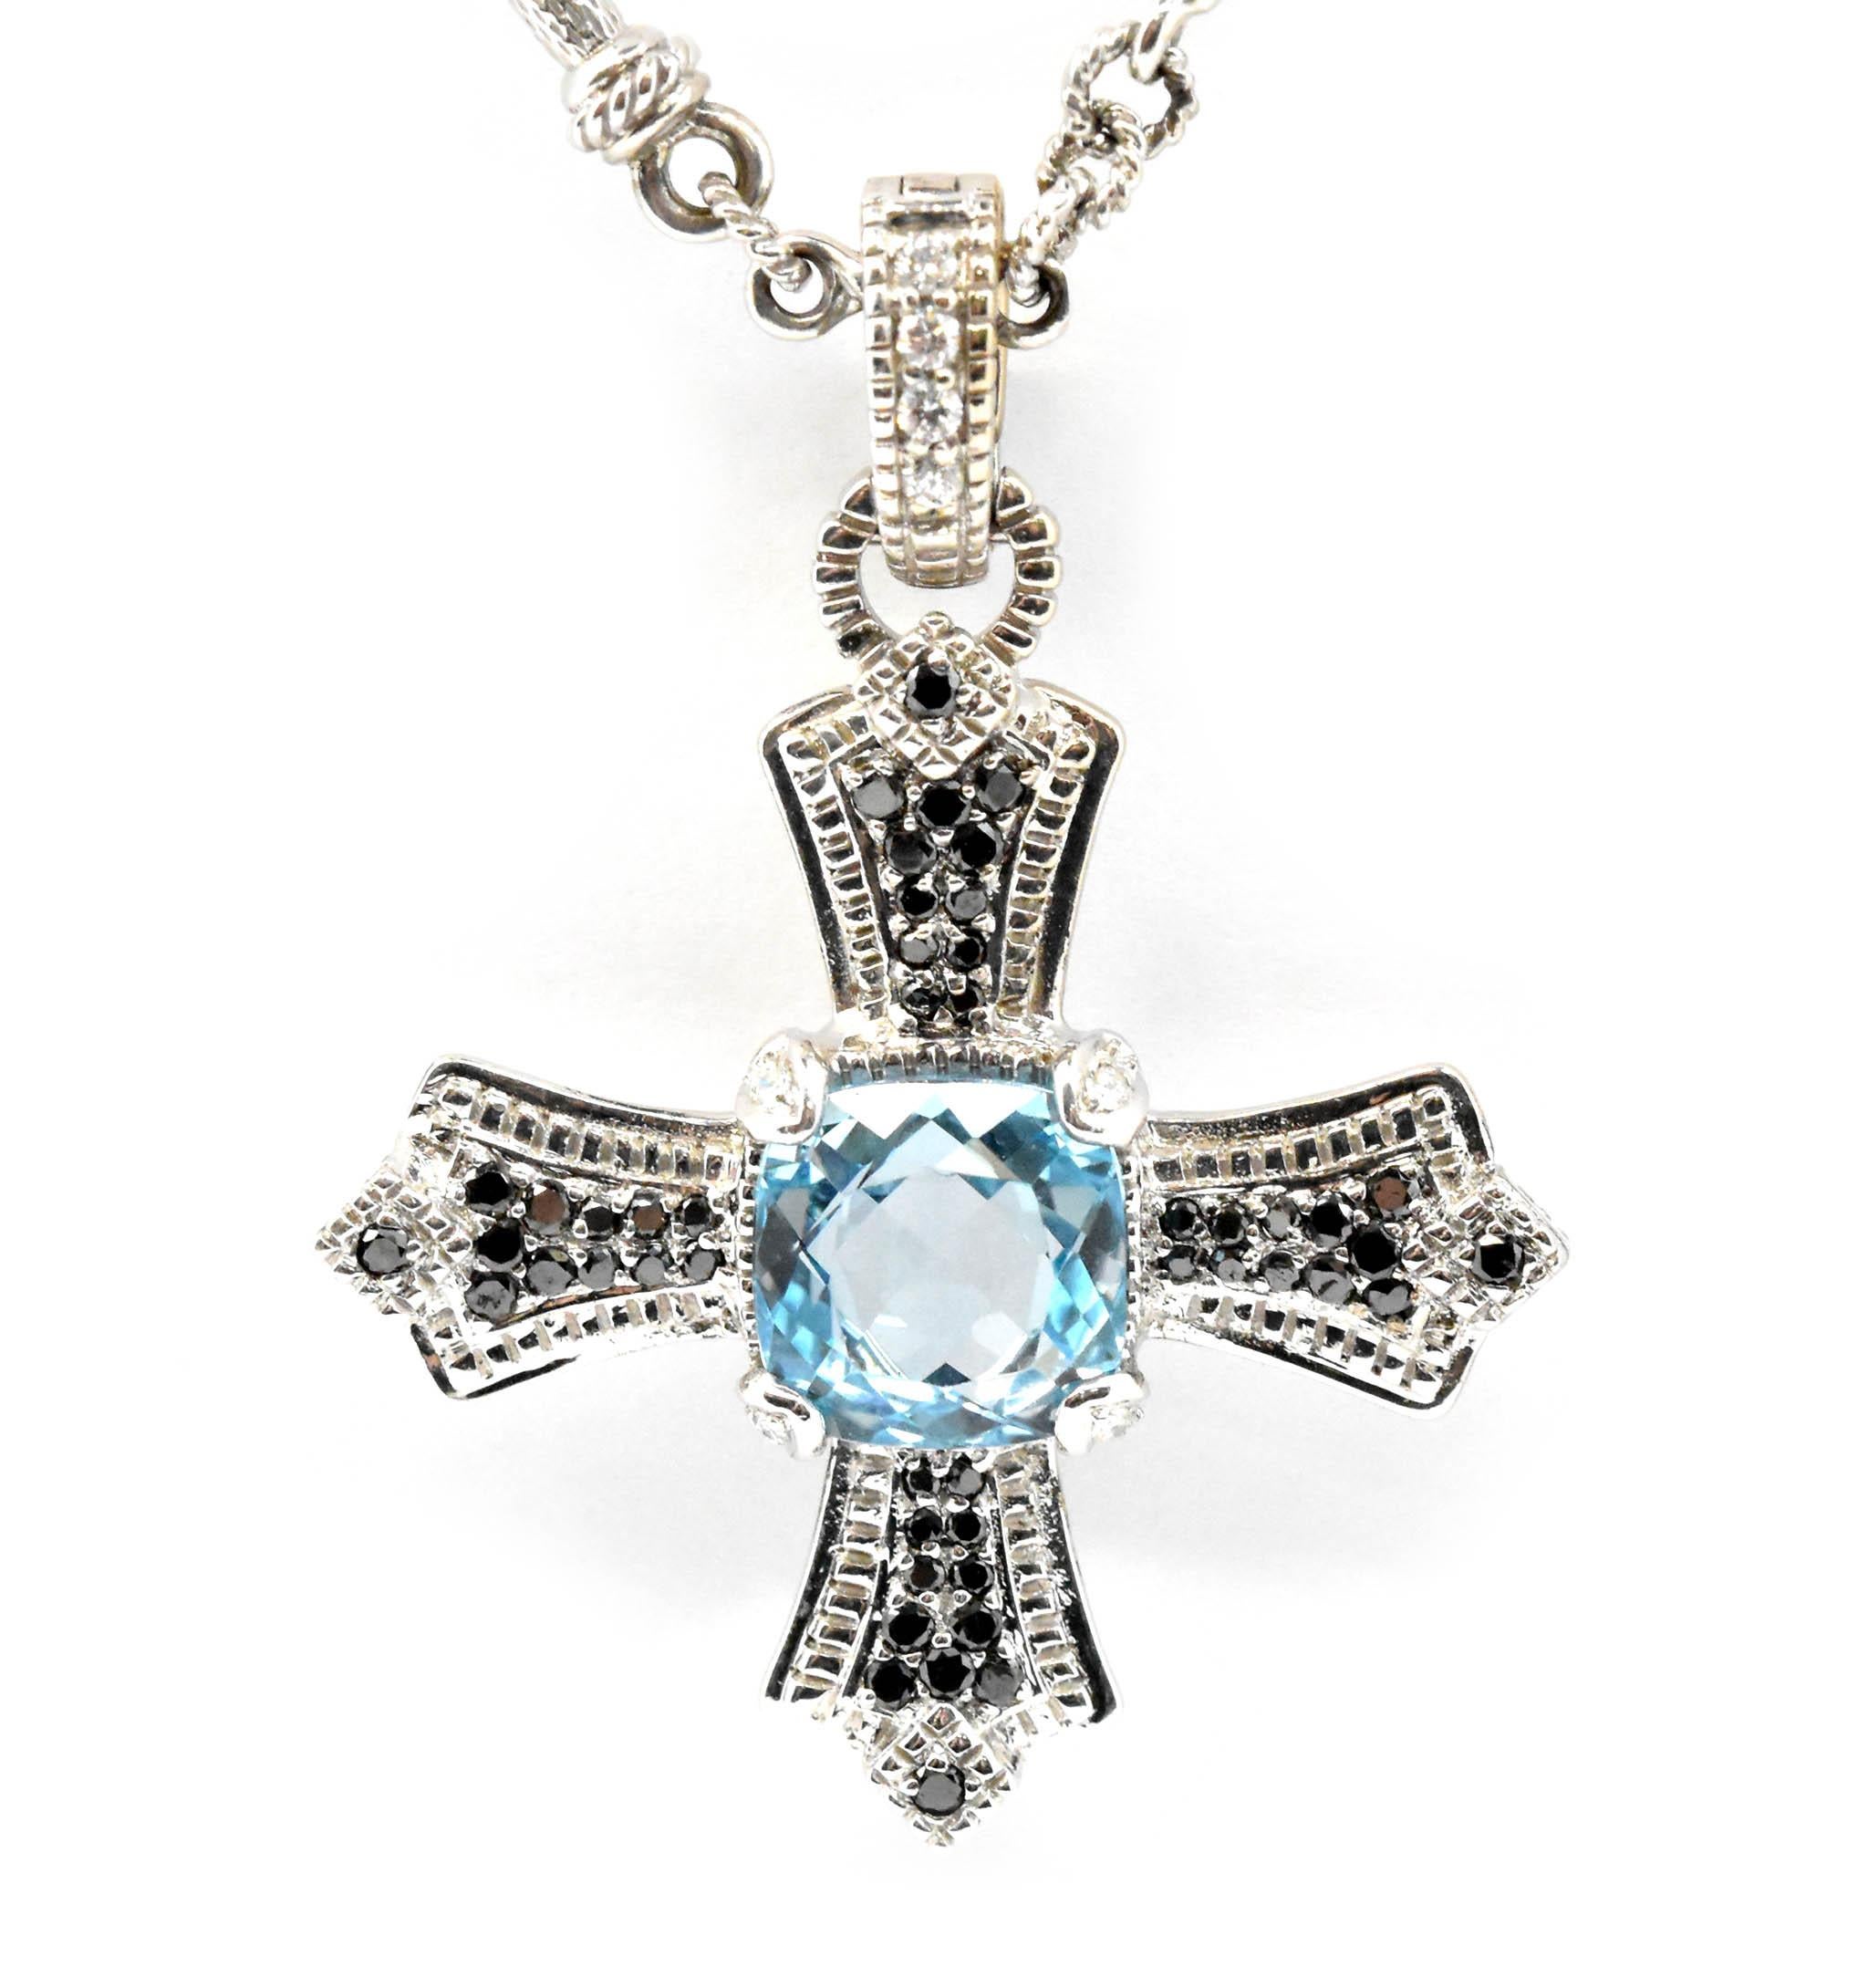 This cross and chain necklace is made in 18k white gold by Judith Ripka. The cross features a 9x9mm square cushion cut stunning blue aquamarine at the center and accented with black diamond melee. There are white diamonds in the bail and chain